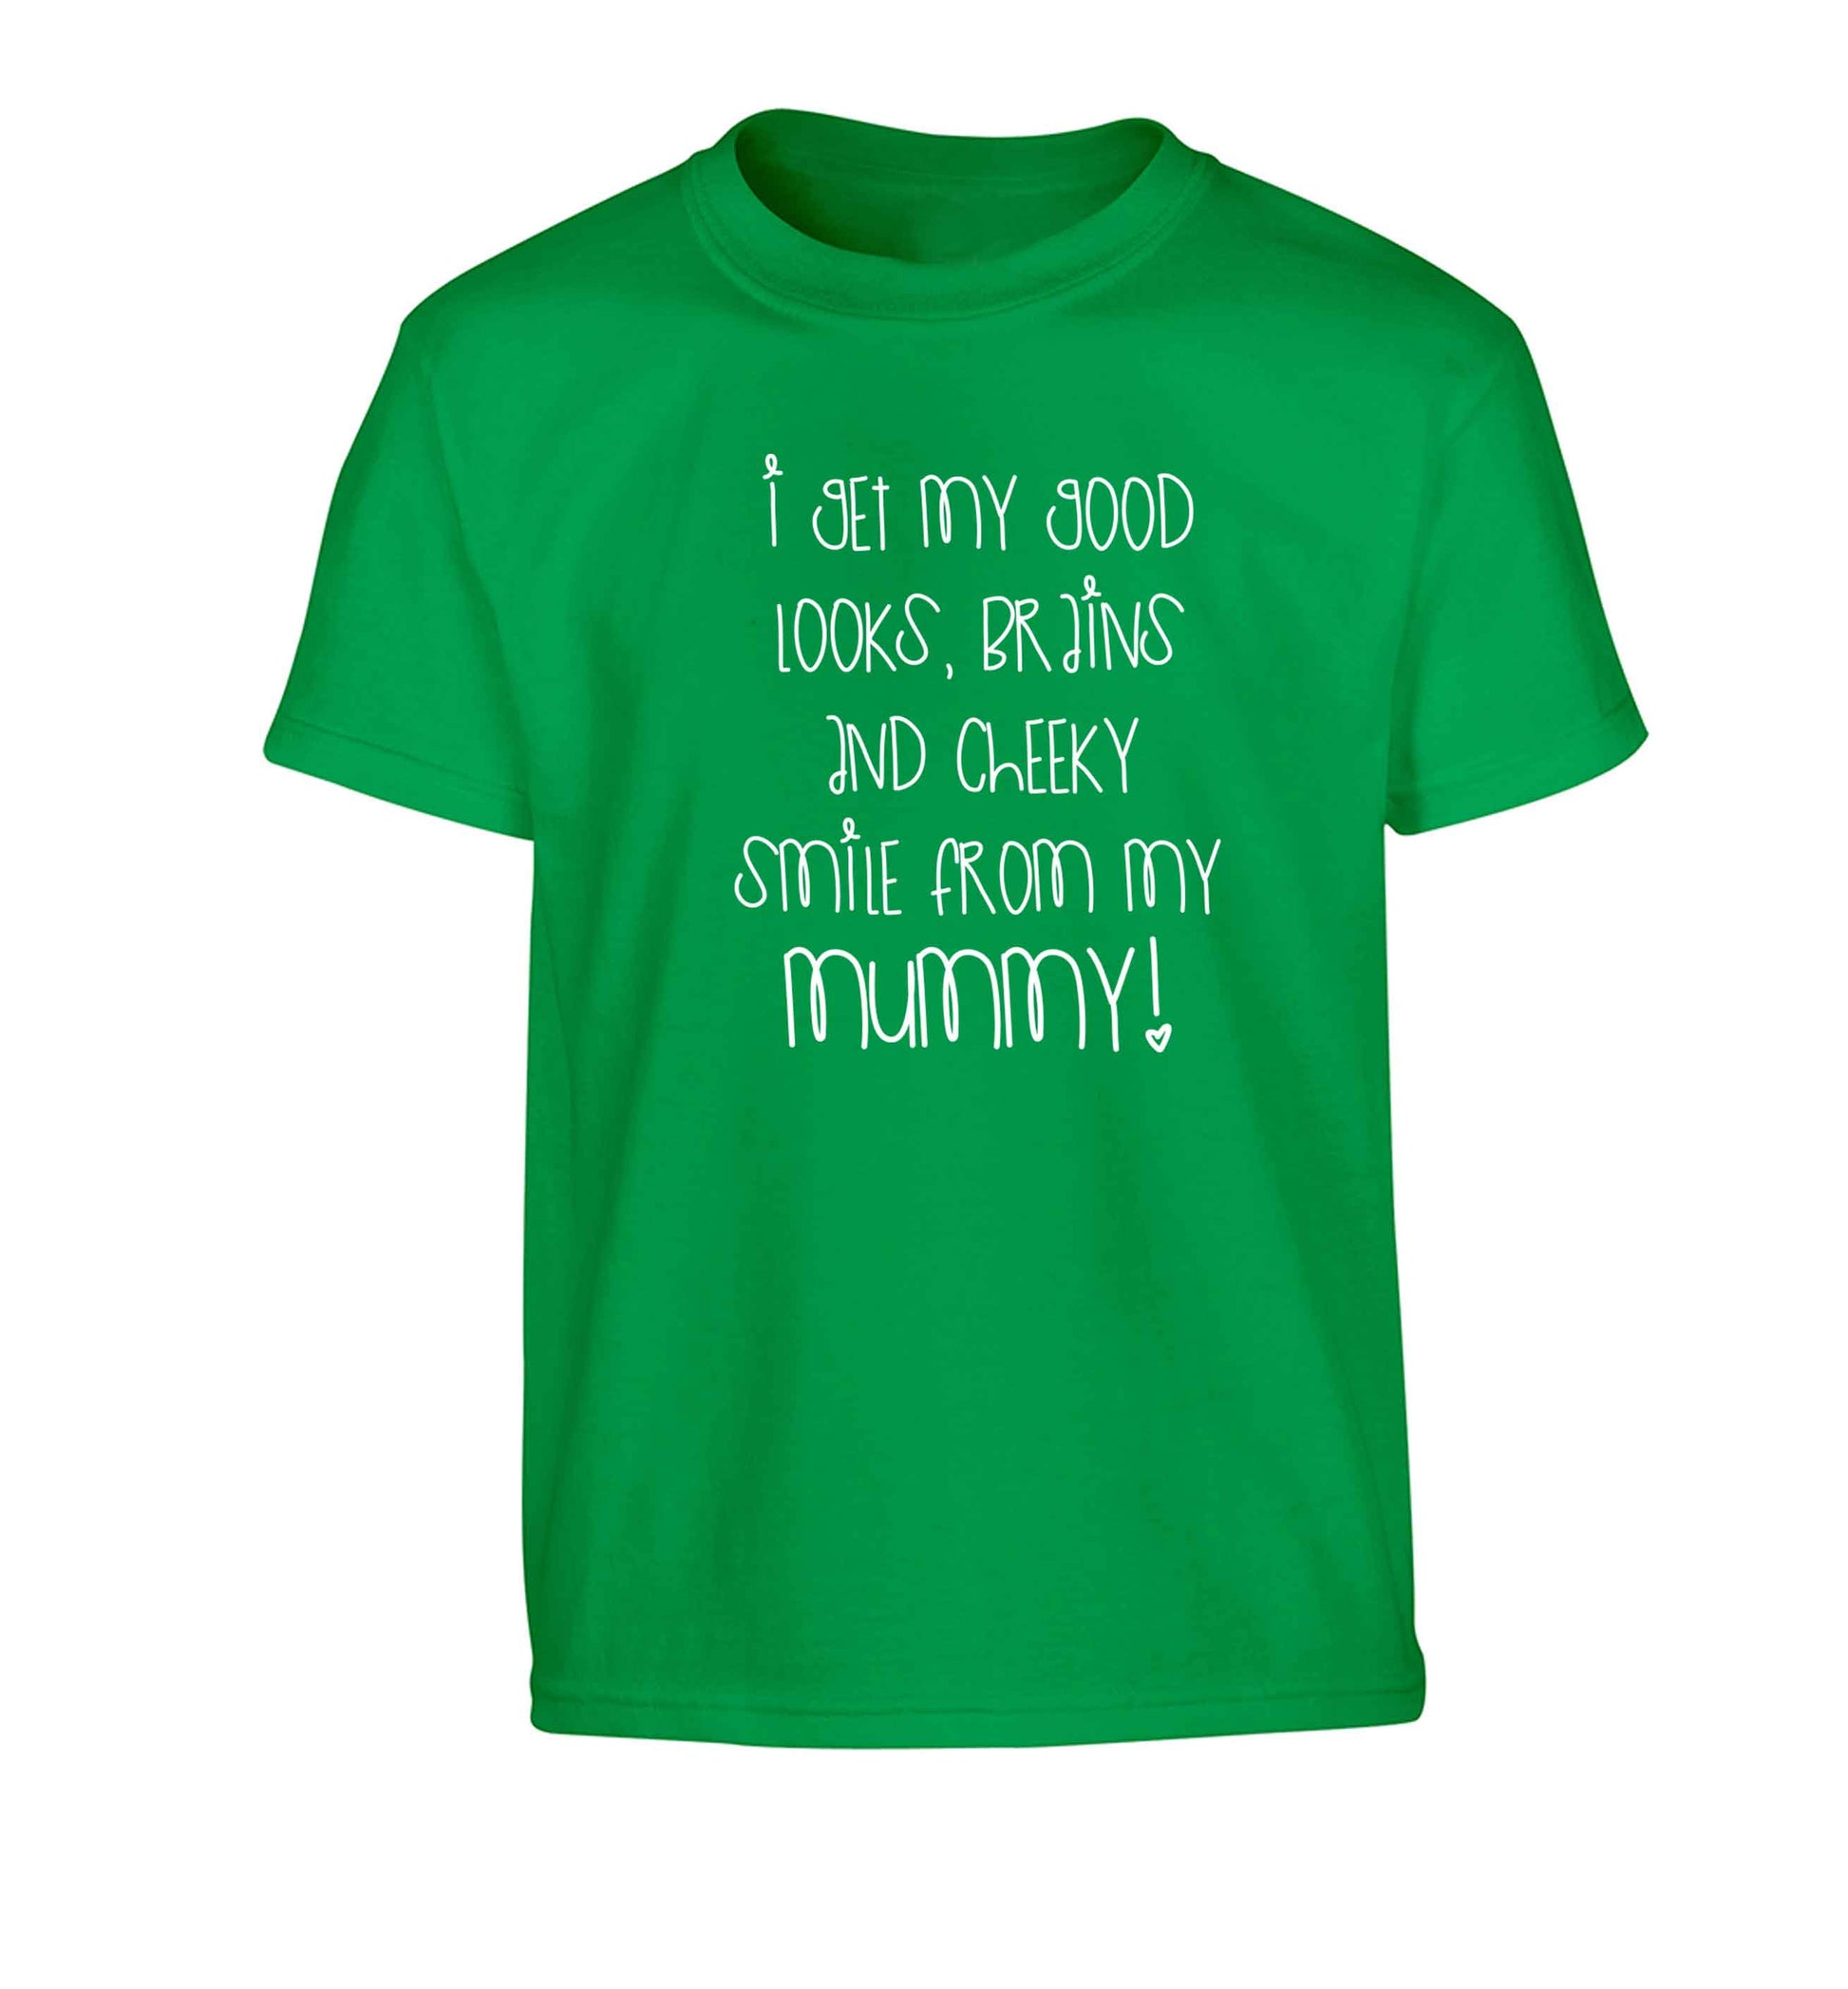 I get my good looks, brains and cheeky smile from my mummy Children's green Tshirt 12-13 Years